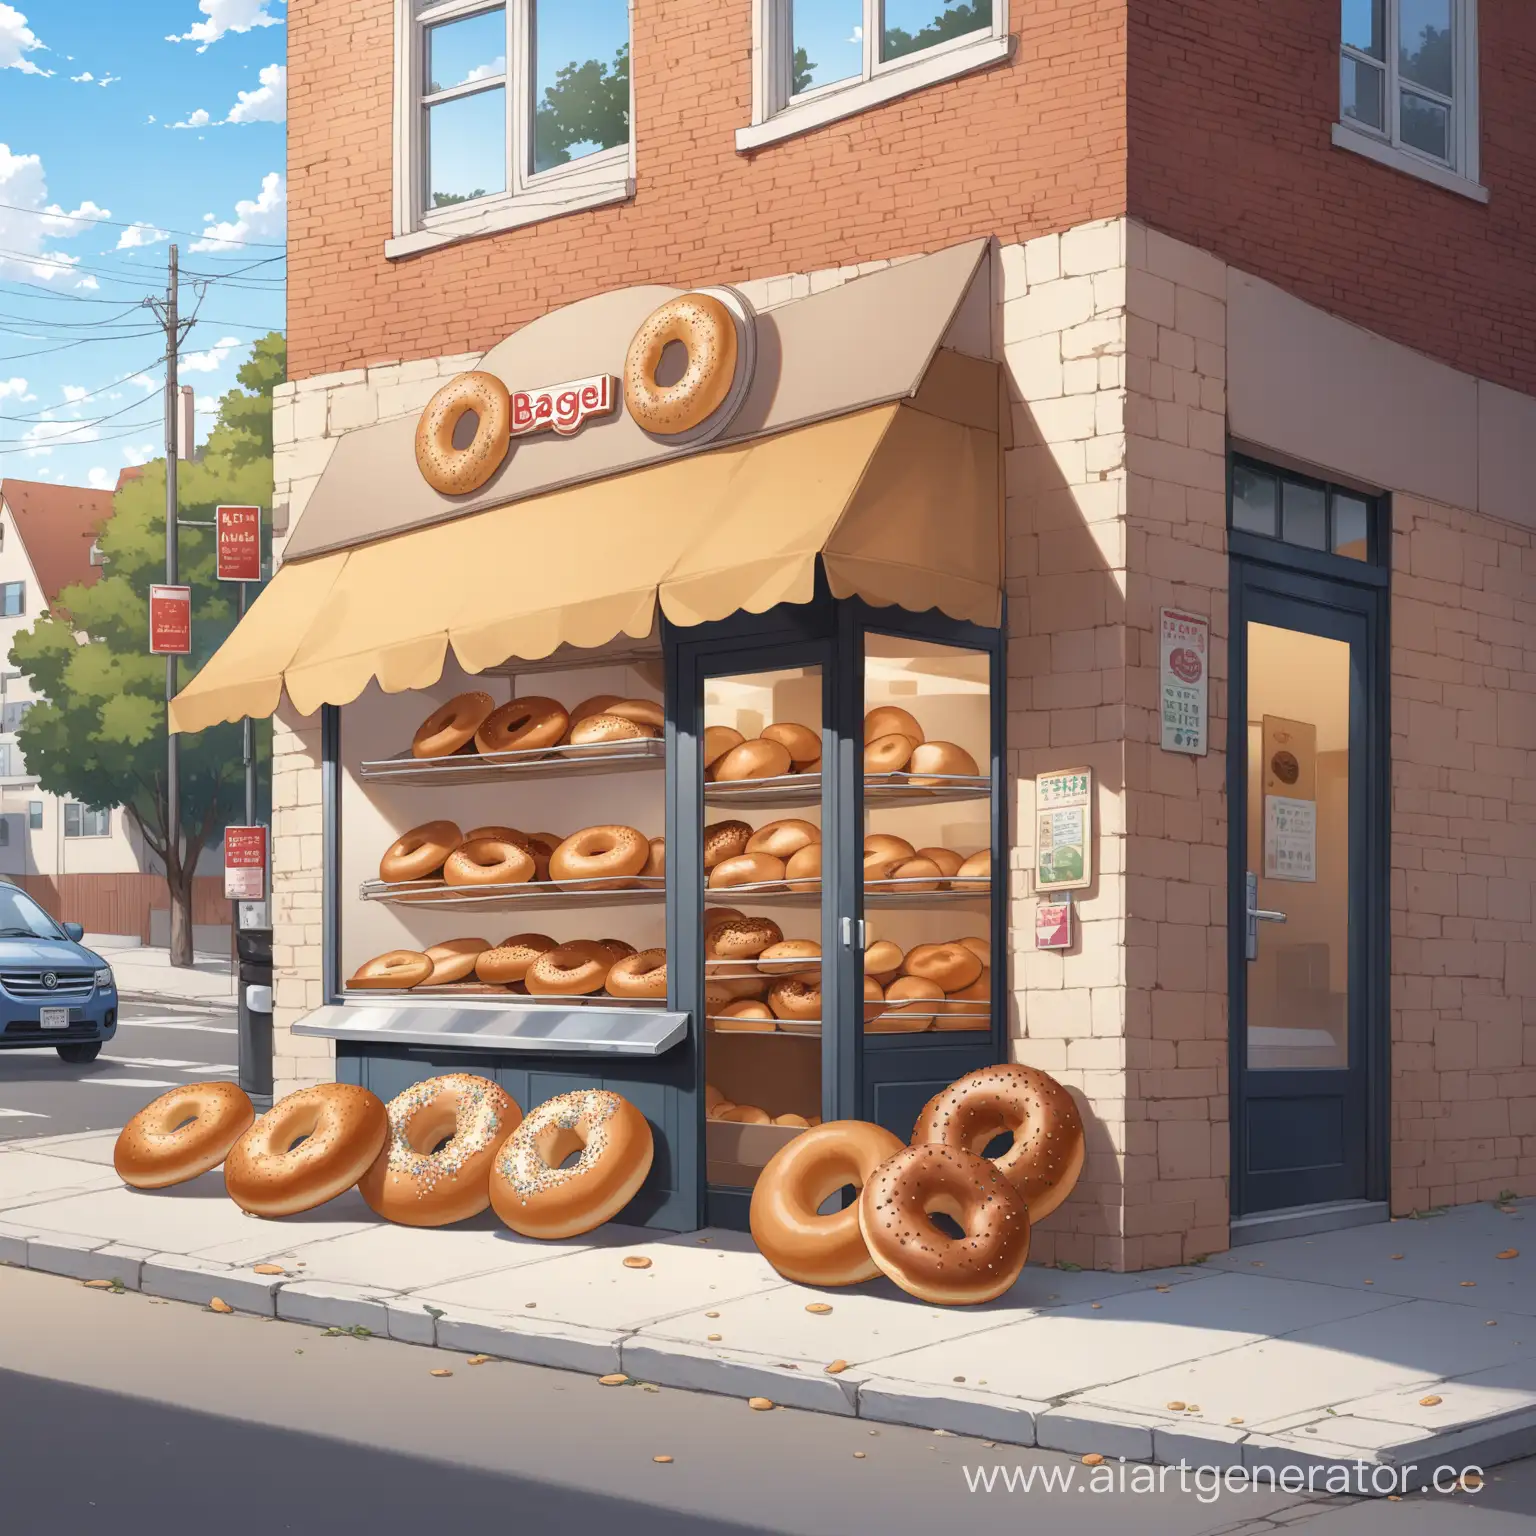 Delicious-Bagel-Stroll-on-a-Vibrant-City-Street